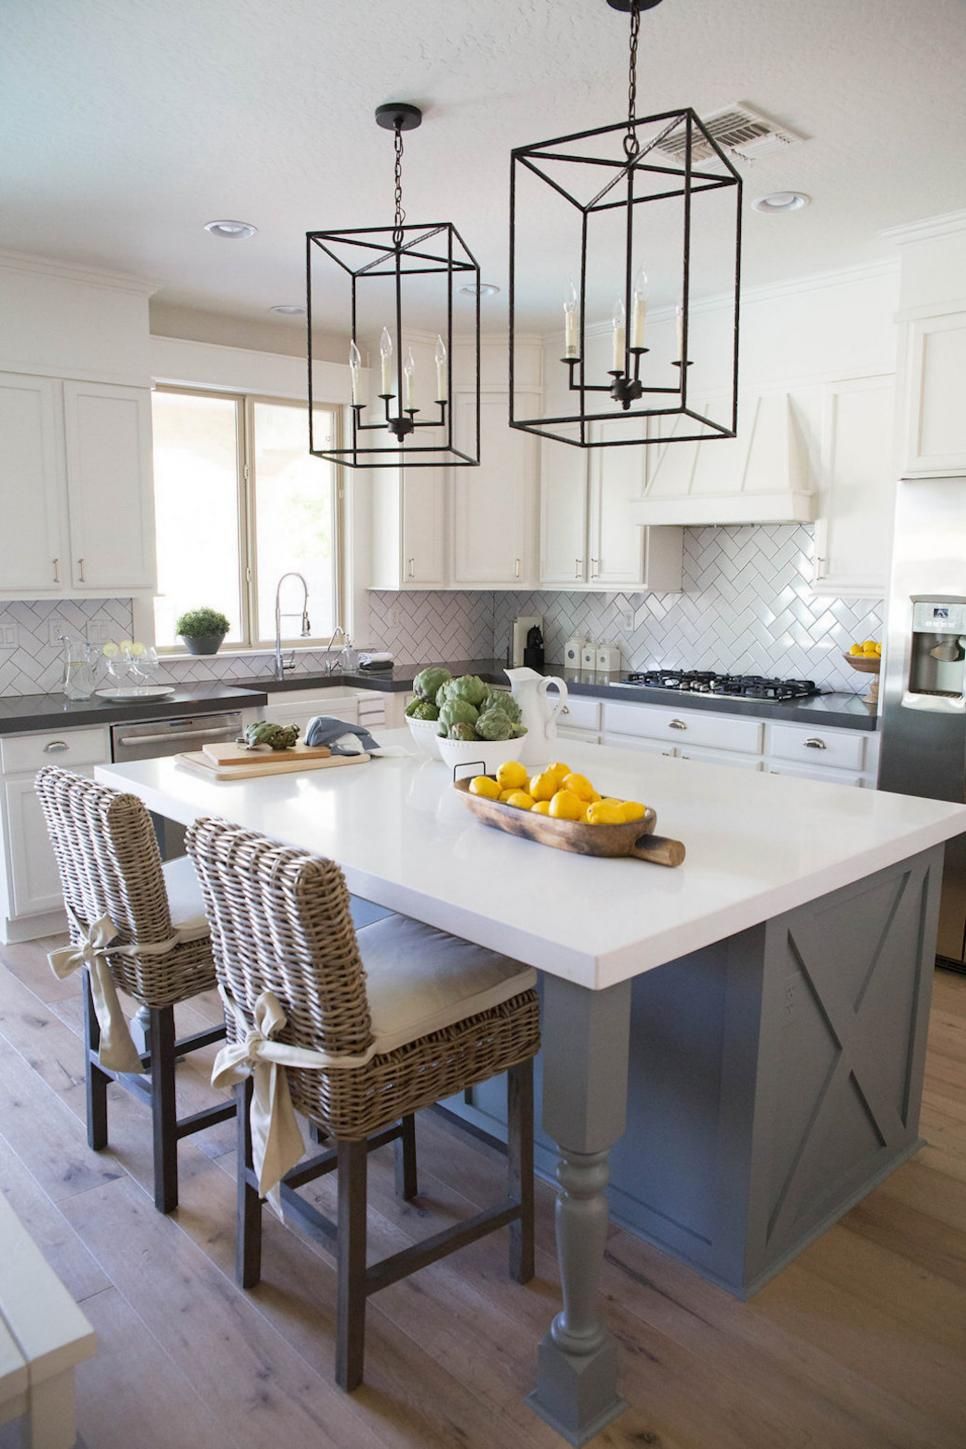 Metal Pendant Lights Over Kitchen Island | Hgtv Pertaining To Kitchen Island Light Chandeliers (View 6 of 15)